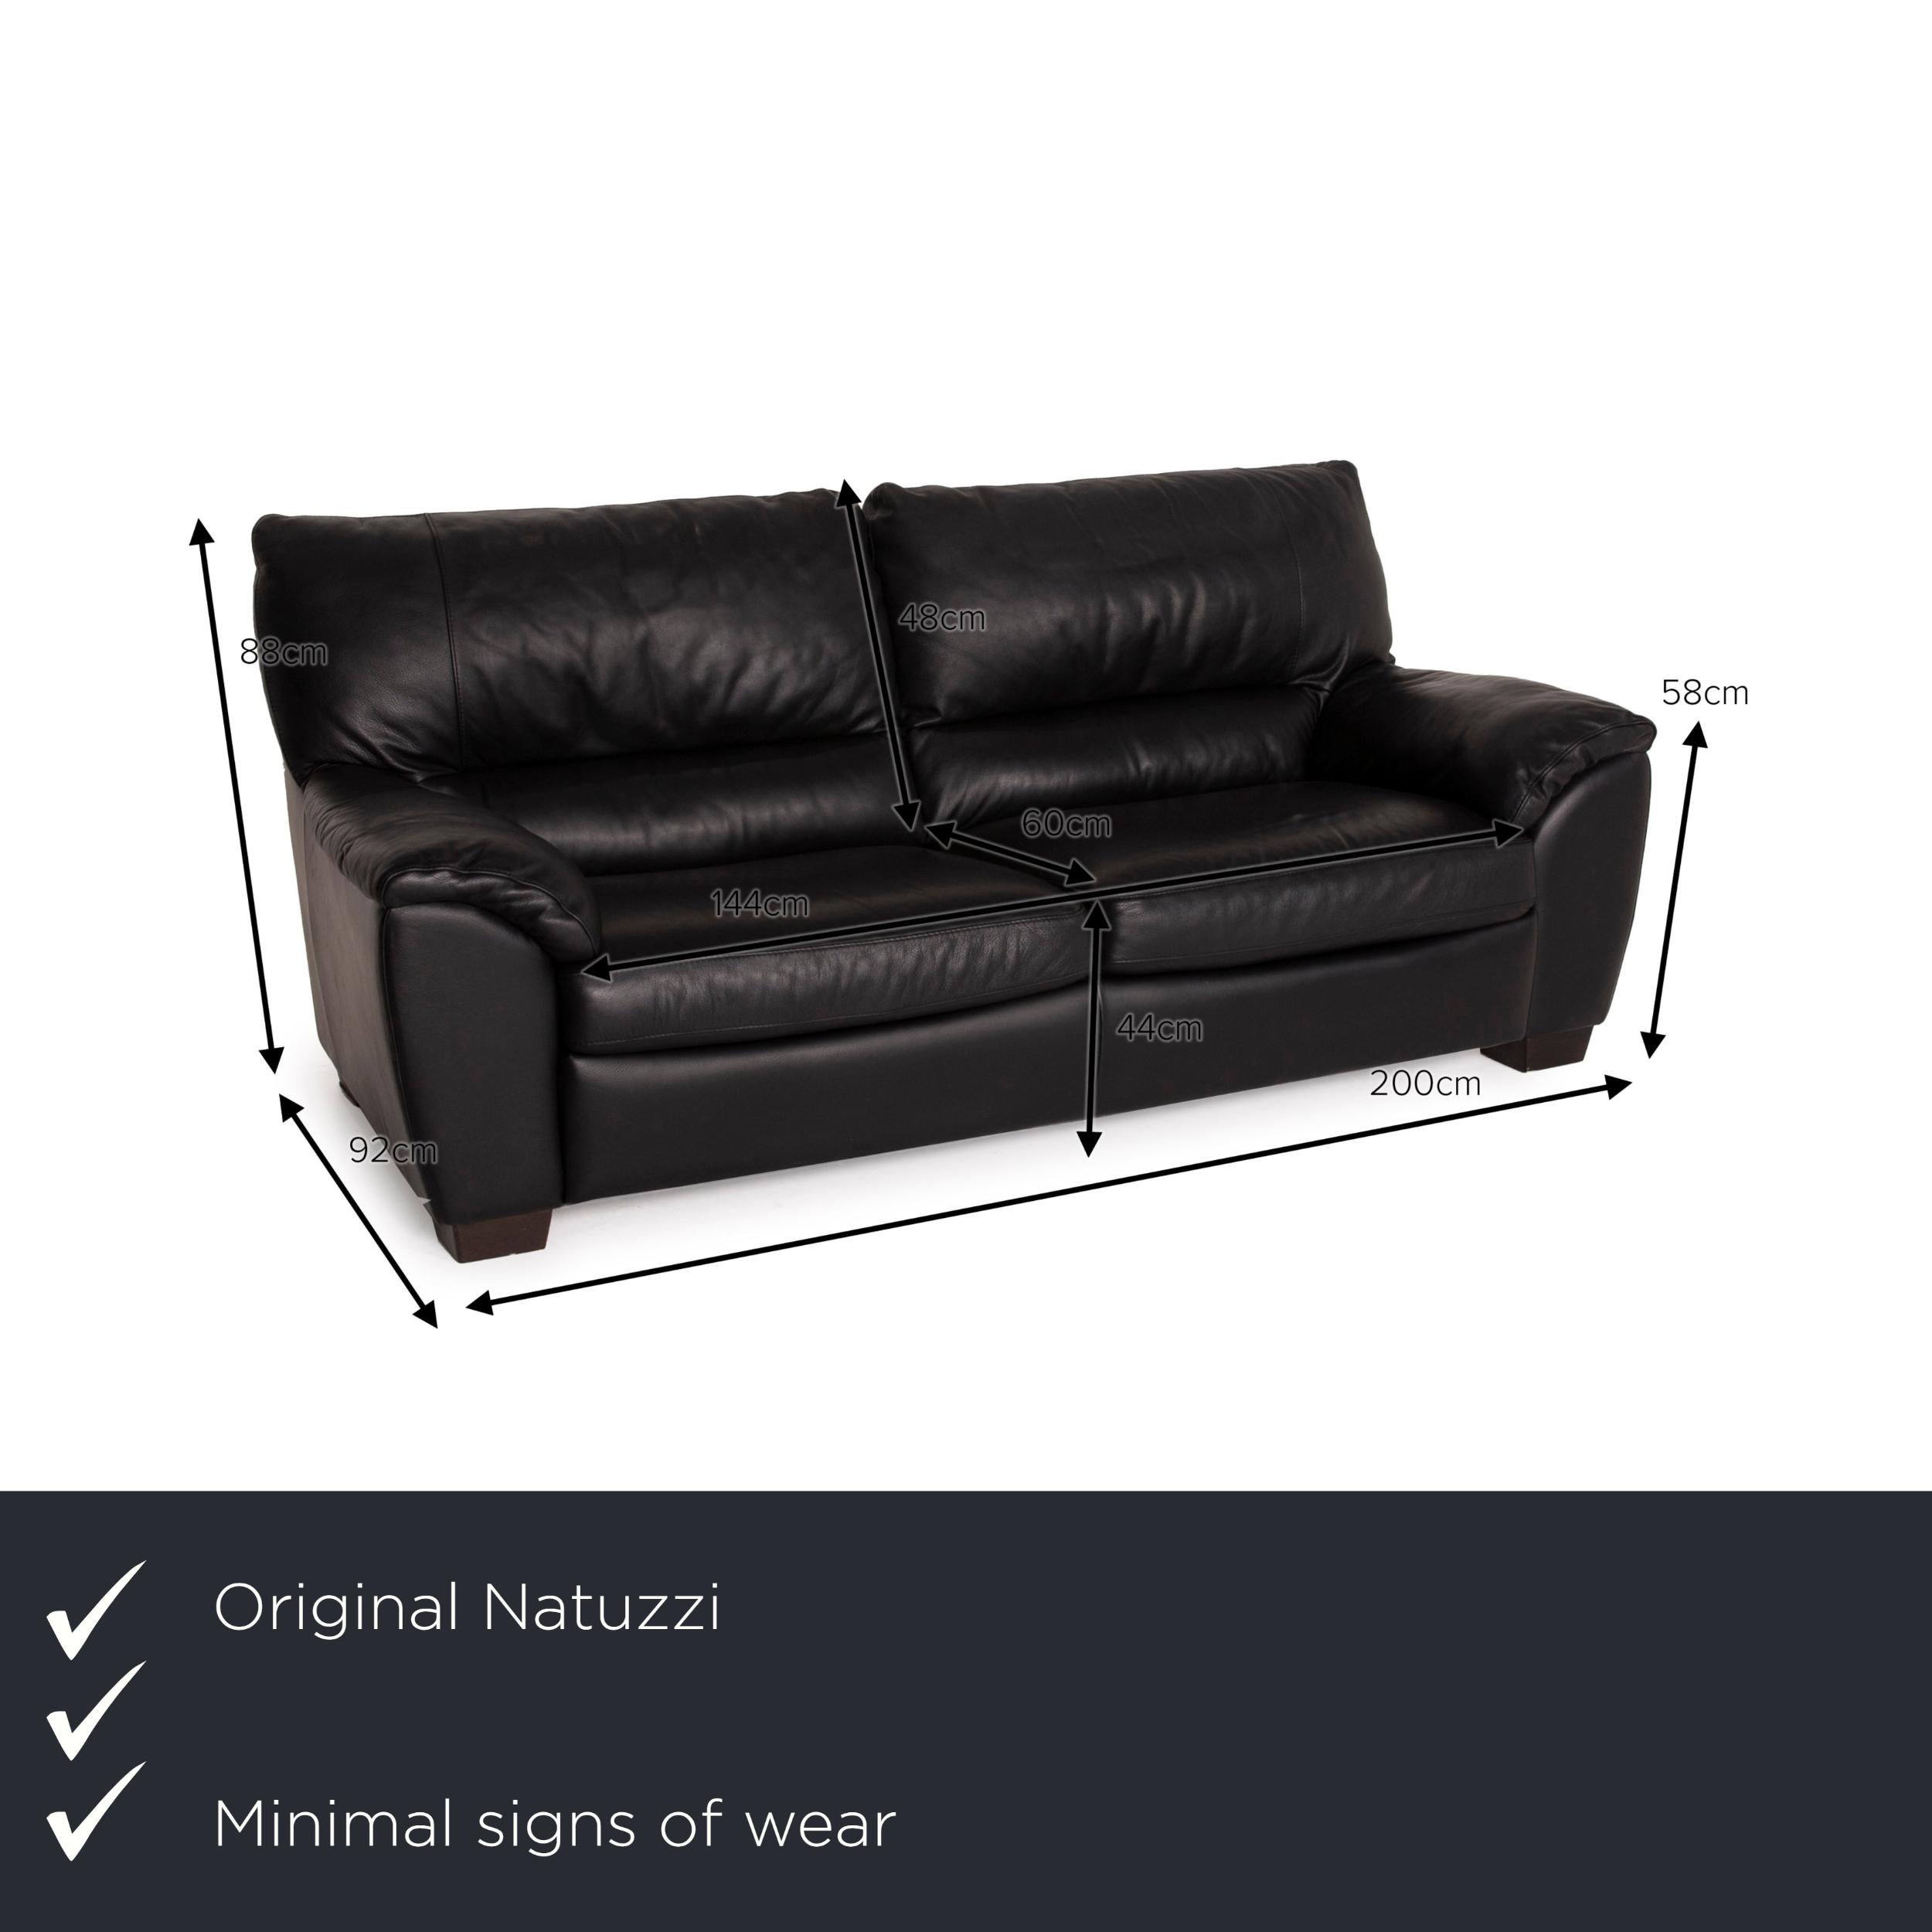 We present to you a Natuzzi two-seater leather sofa set black 2x two-seater.

 

 Product measurements in centimeters:
 

 depth: 92
 width: 200
 height: 88
 seat height: 44
 rest height: 58
 seat depth: 60
 seat width: 144
 back